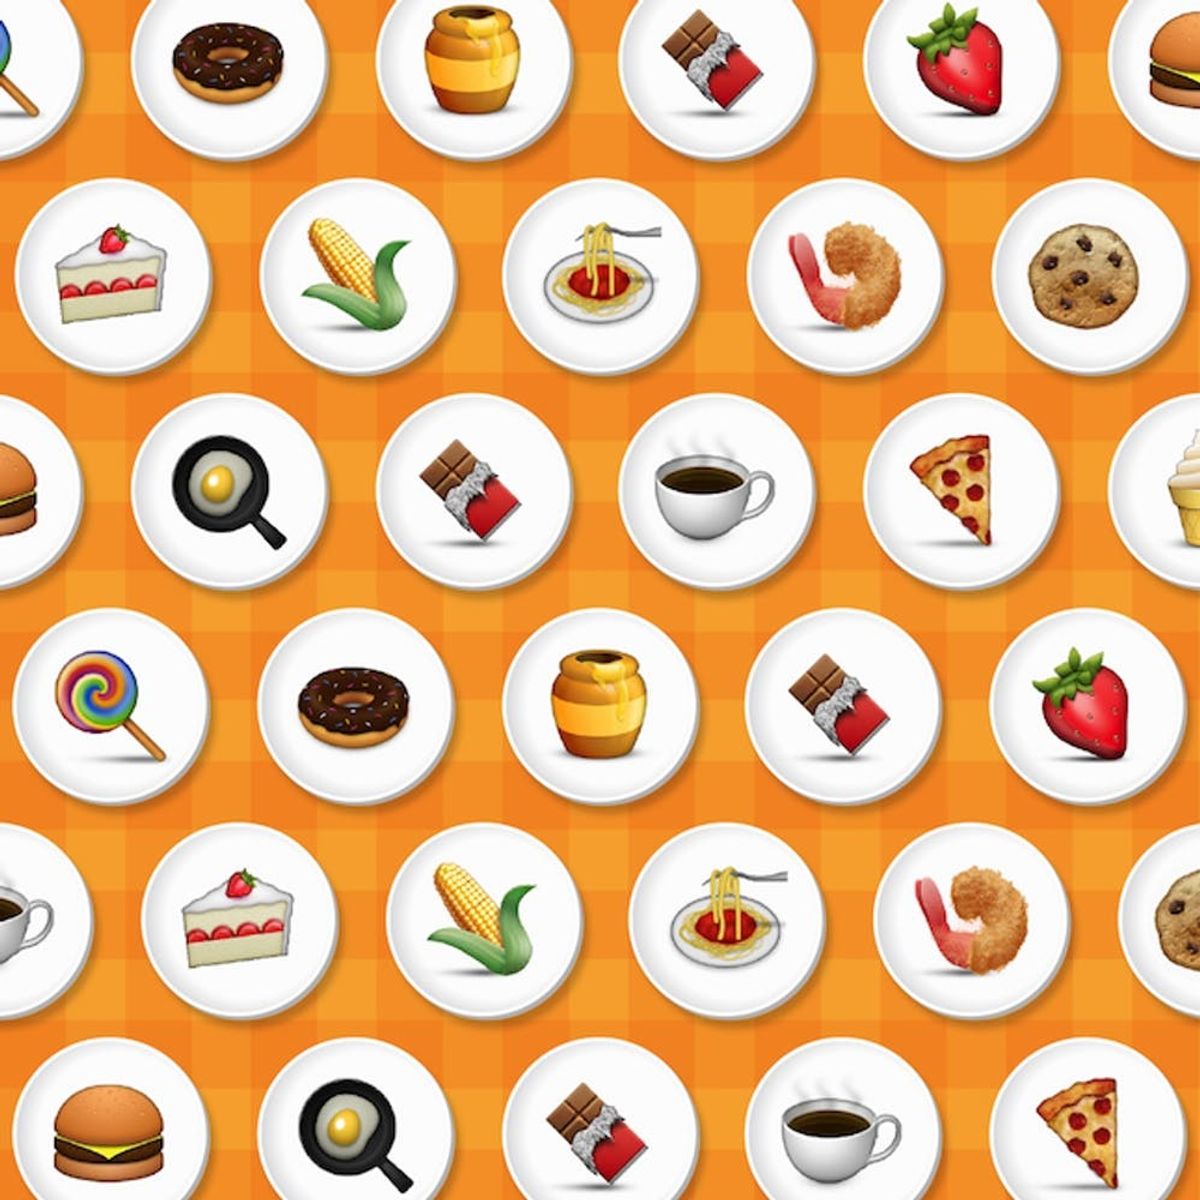 See What Your State’s Favorite Food Emoji Is on This Nifty Infographic